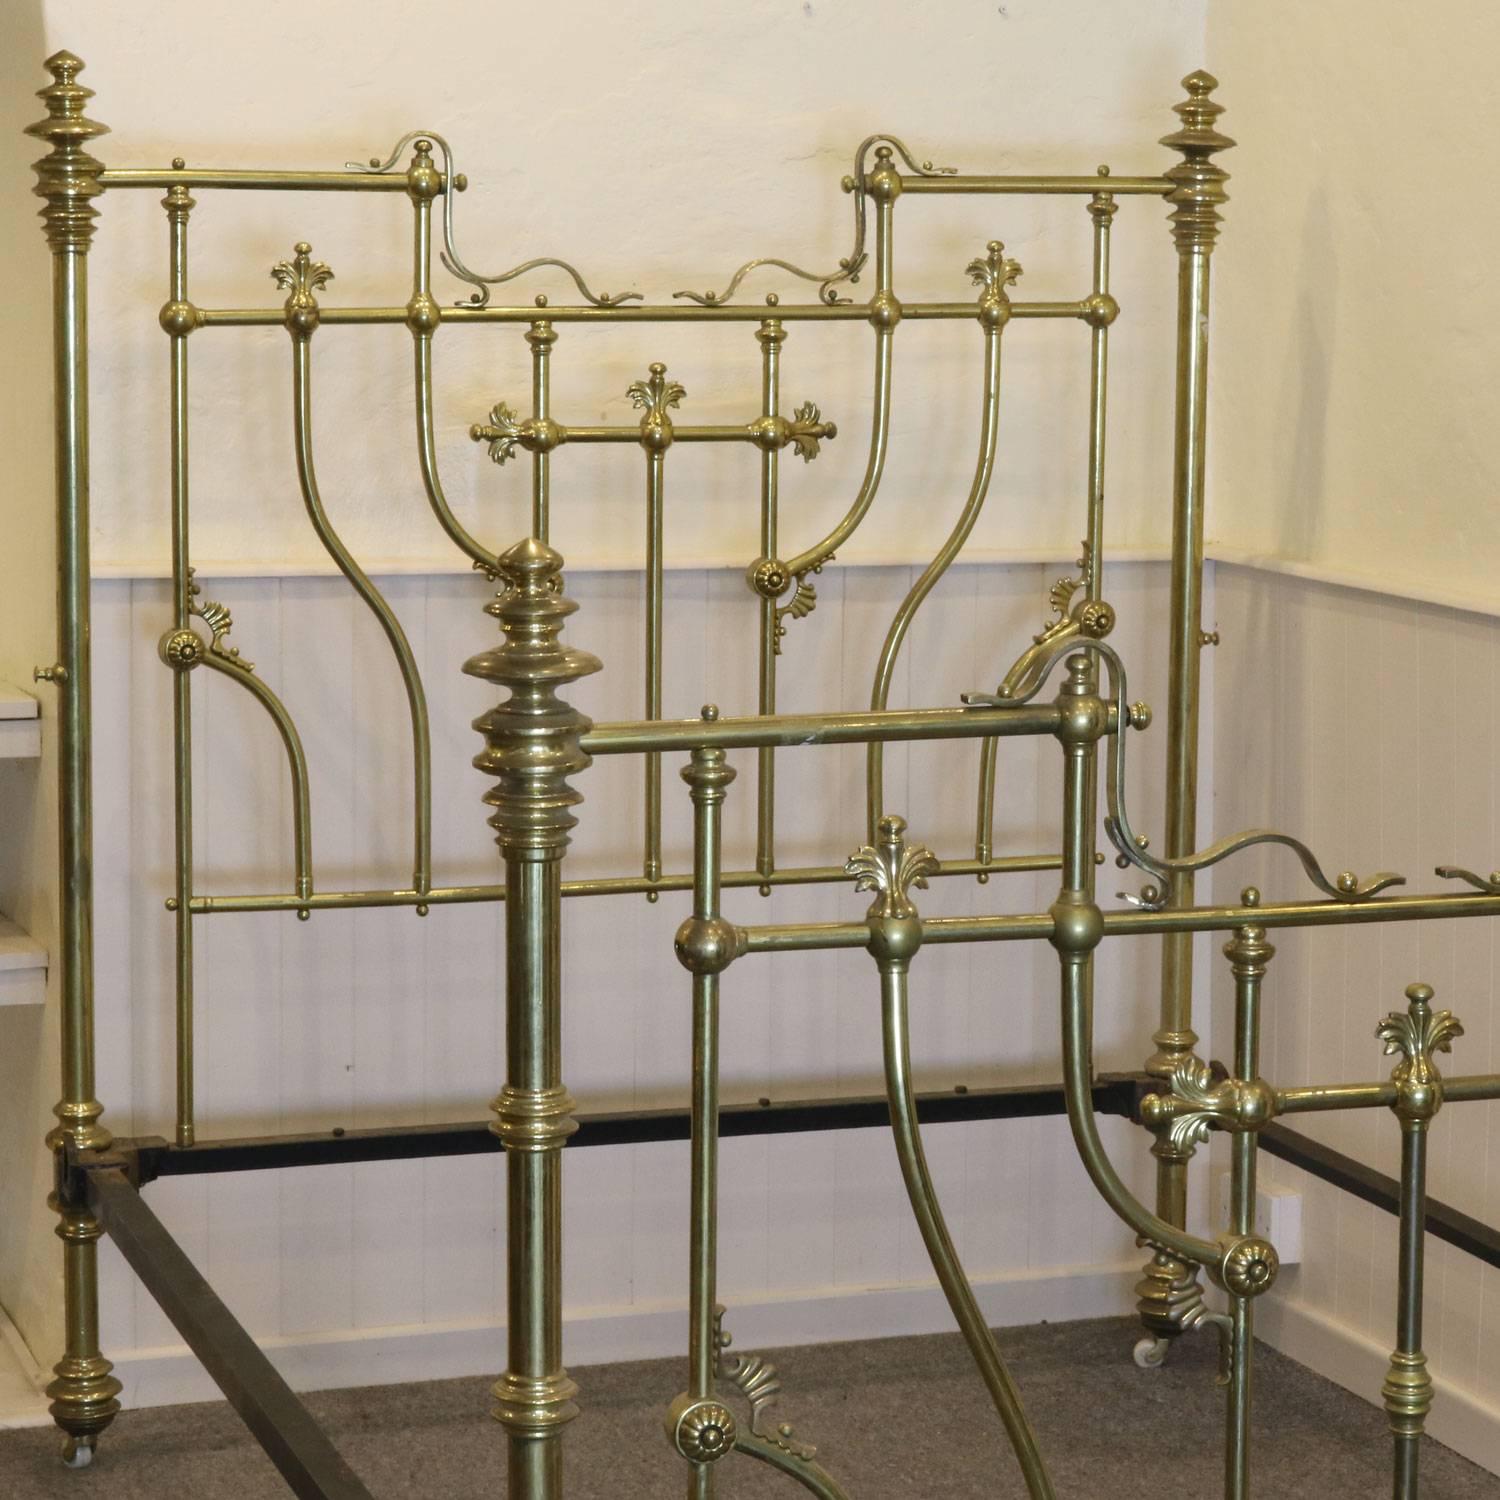 An unusual brass bed from the Victorian era.

The price is for the bedstead frame alone. The base, mattress and bedding are extra and can be provided by Seventh Heaven.

The bed currently accepts a double base and mattress but can be extended to